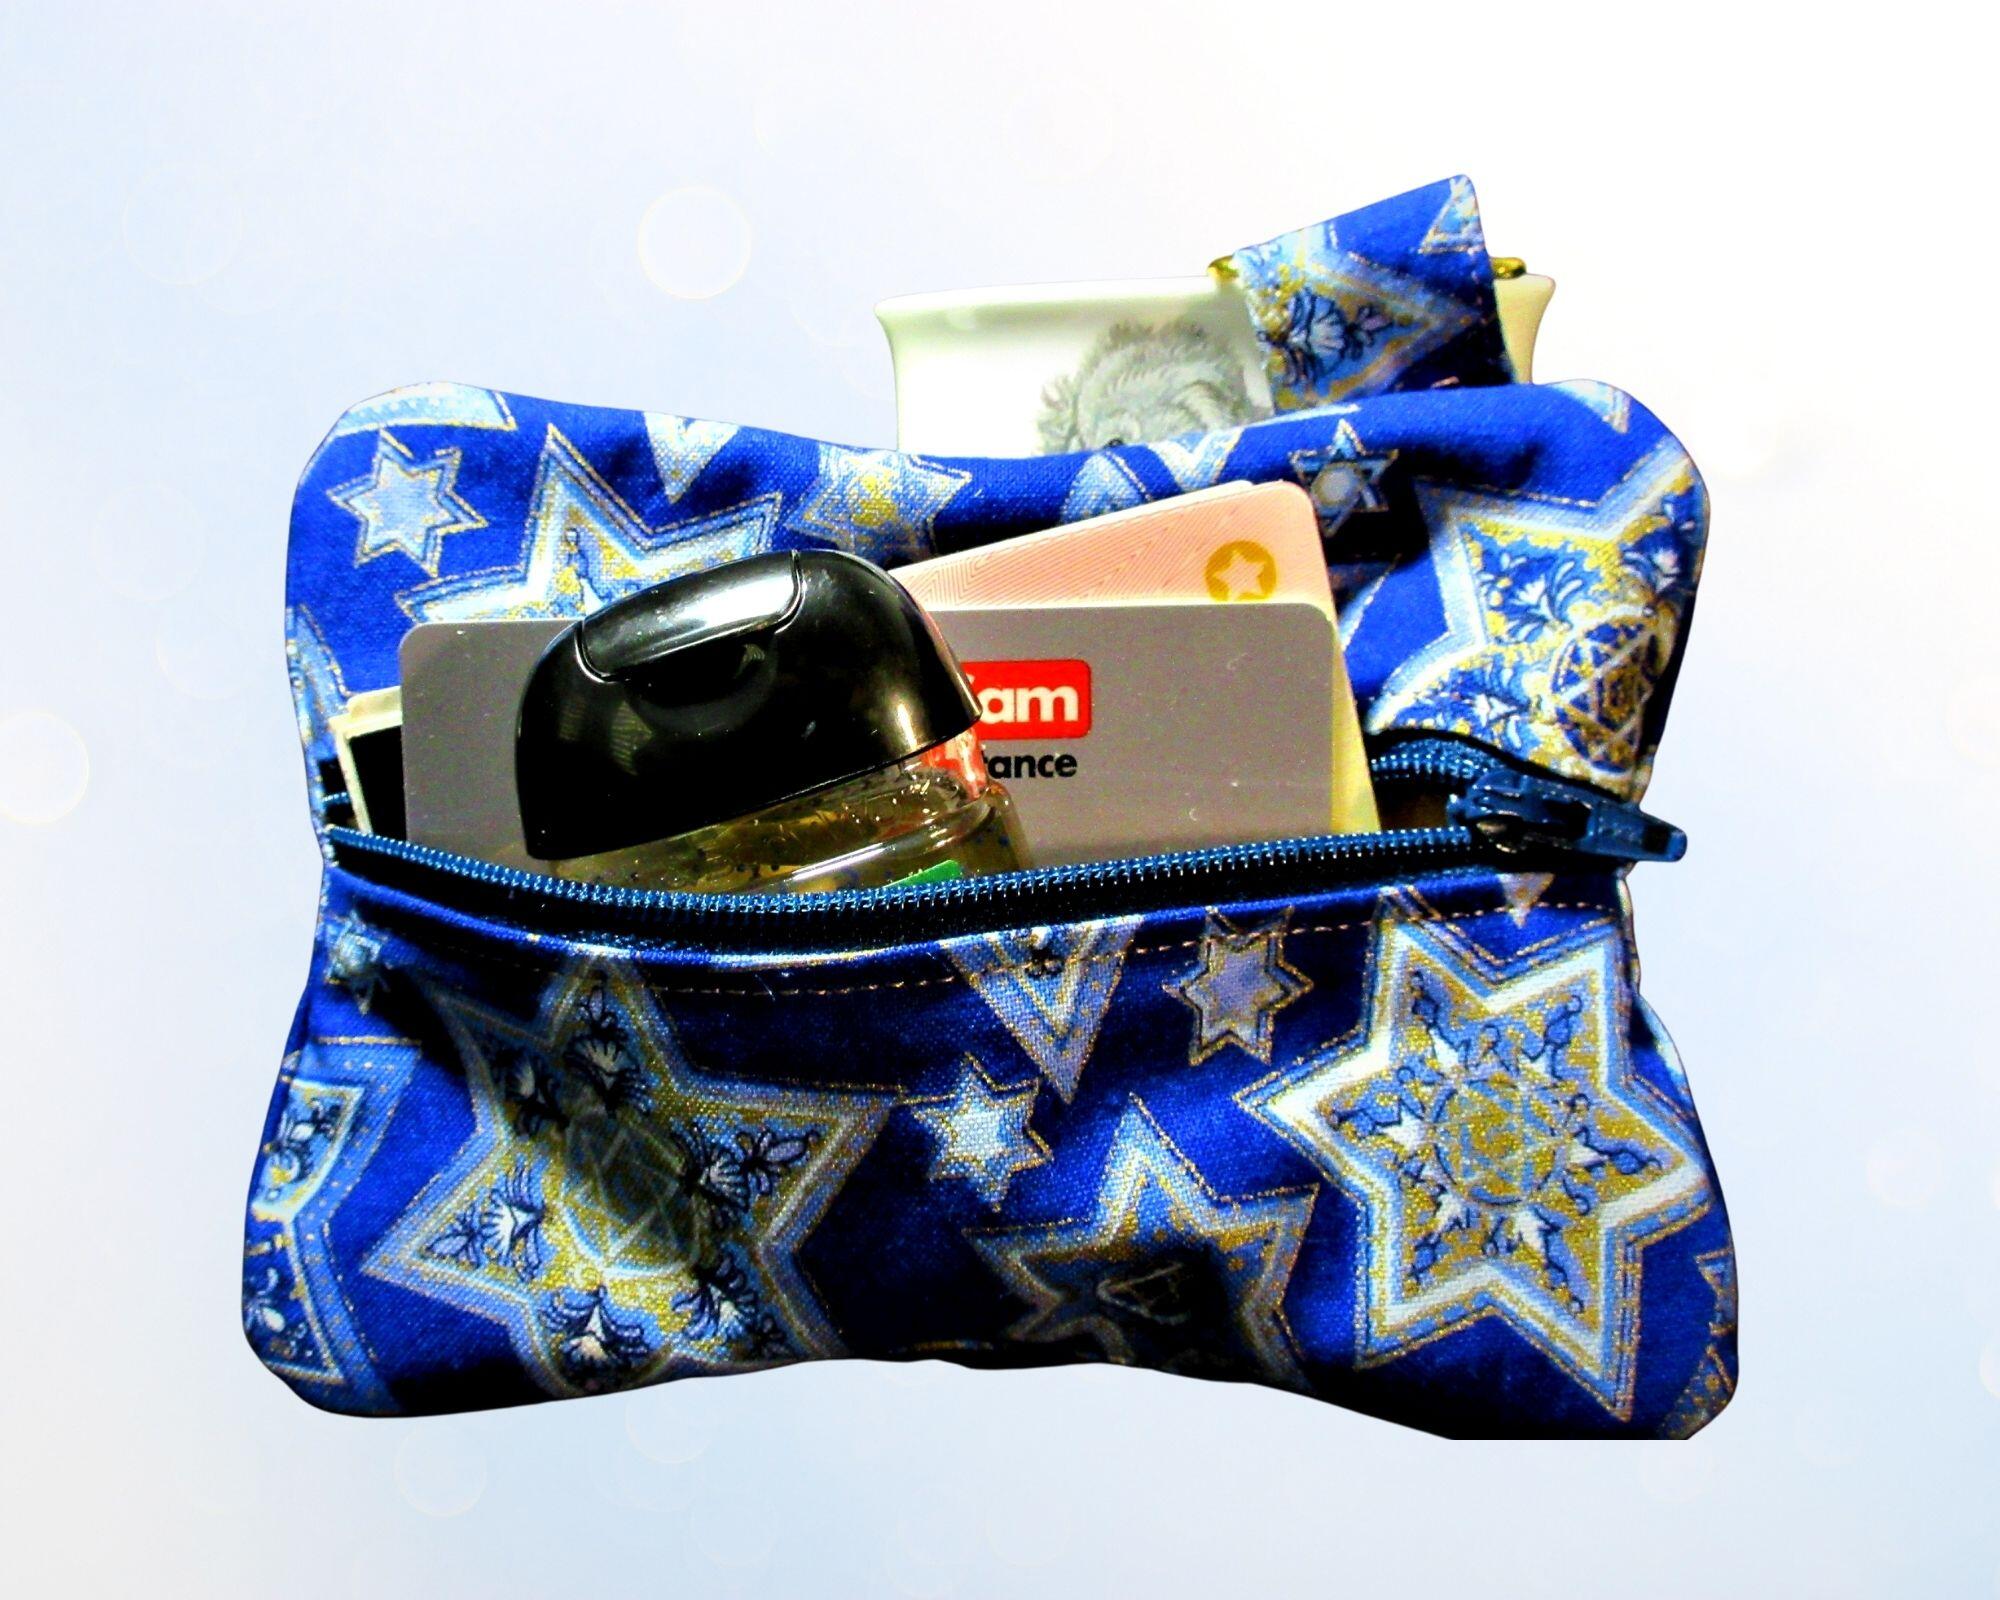 filled with hand sanitizer and money 
Jewish star 6 points blue and gold with gold tone hardware Multi purpose pouch Handmade by a Fur Baby Favorite dog poop bag holder waste bag dispenser training treat pouch binky pacifier bag change purse pouch